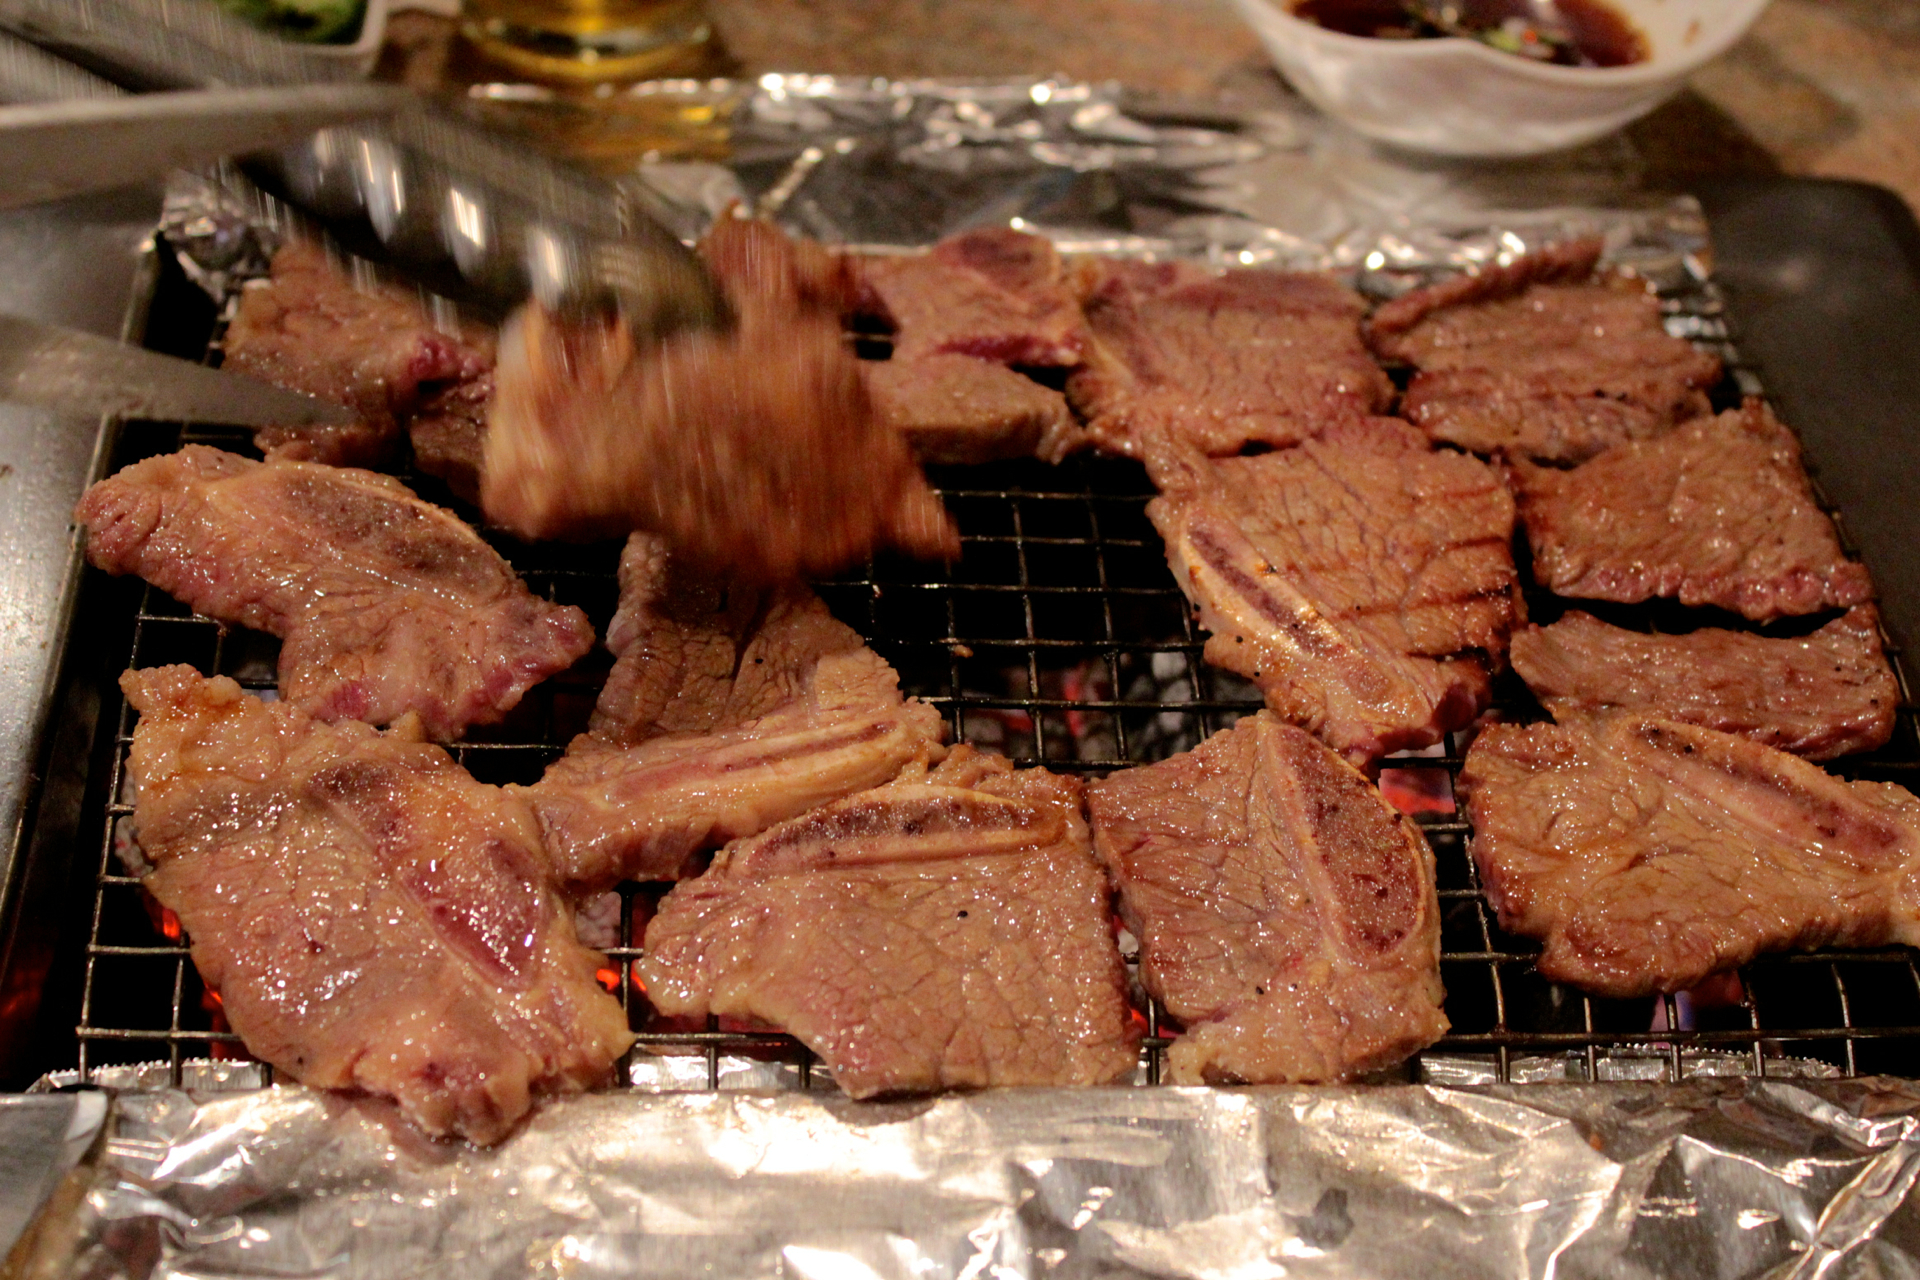 A server cooks short ribs on the charcoal grill at Han Sung.